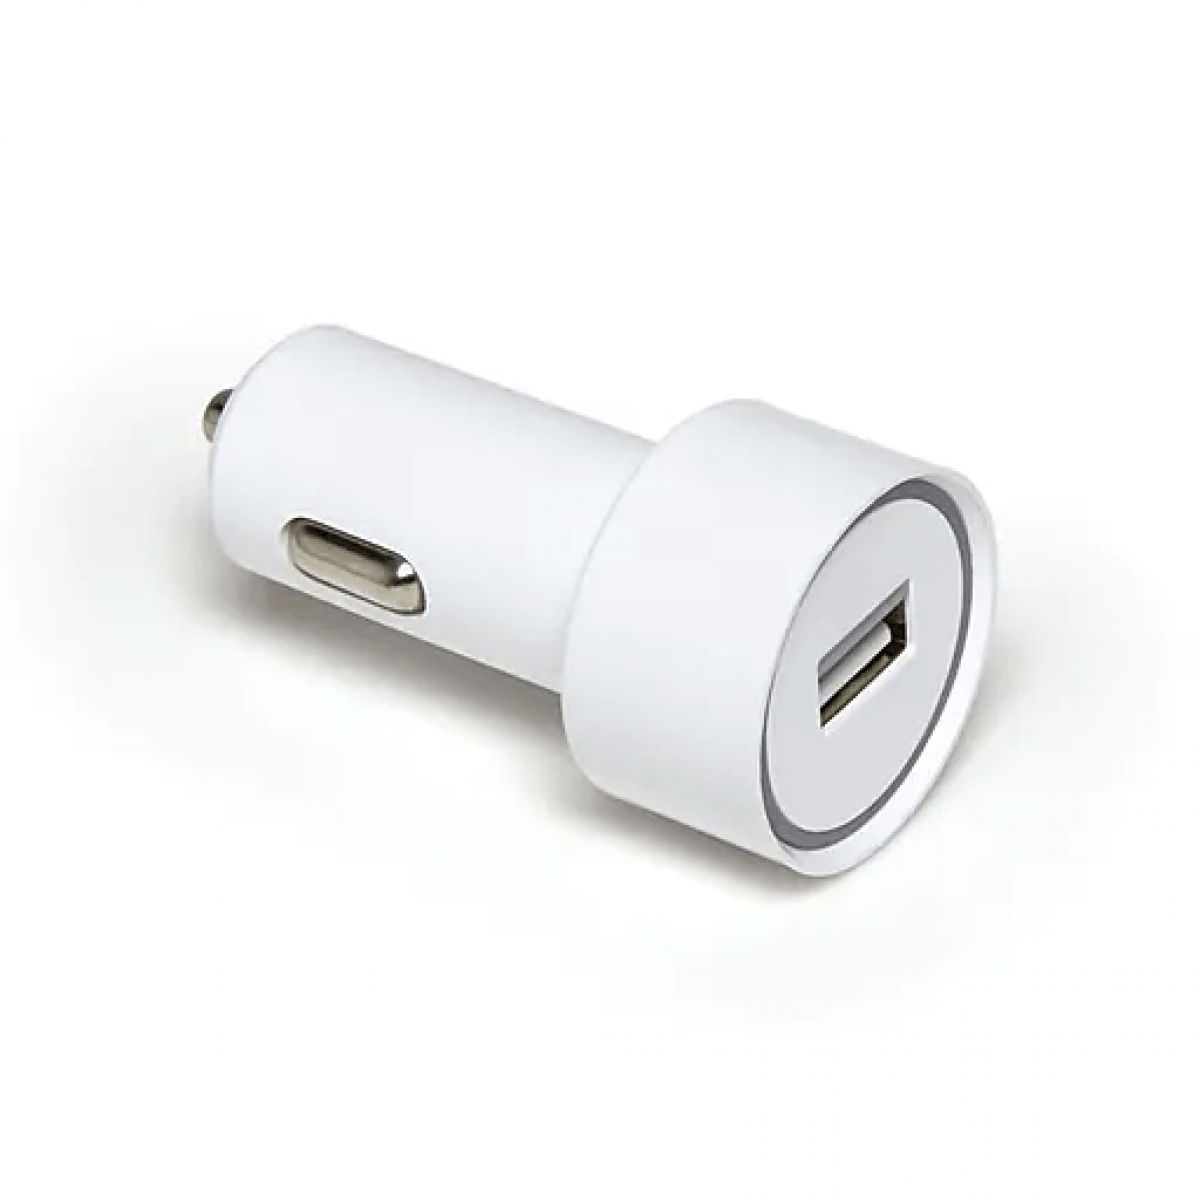 NXT Technologies Universal 1 USB Port Car Charger in White NX54339